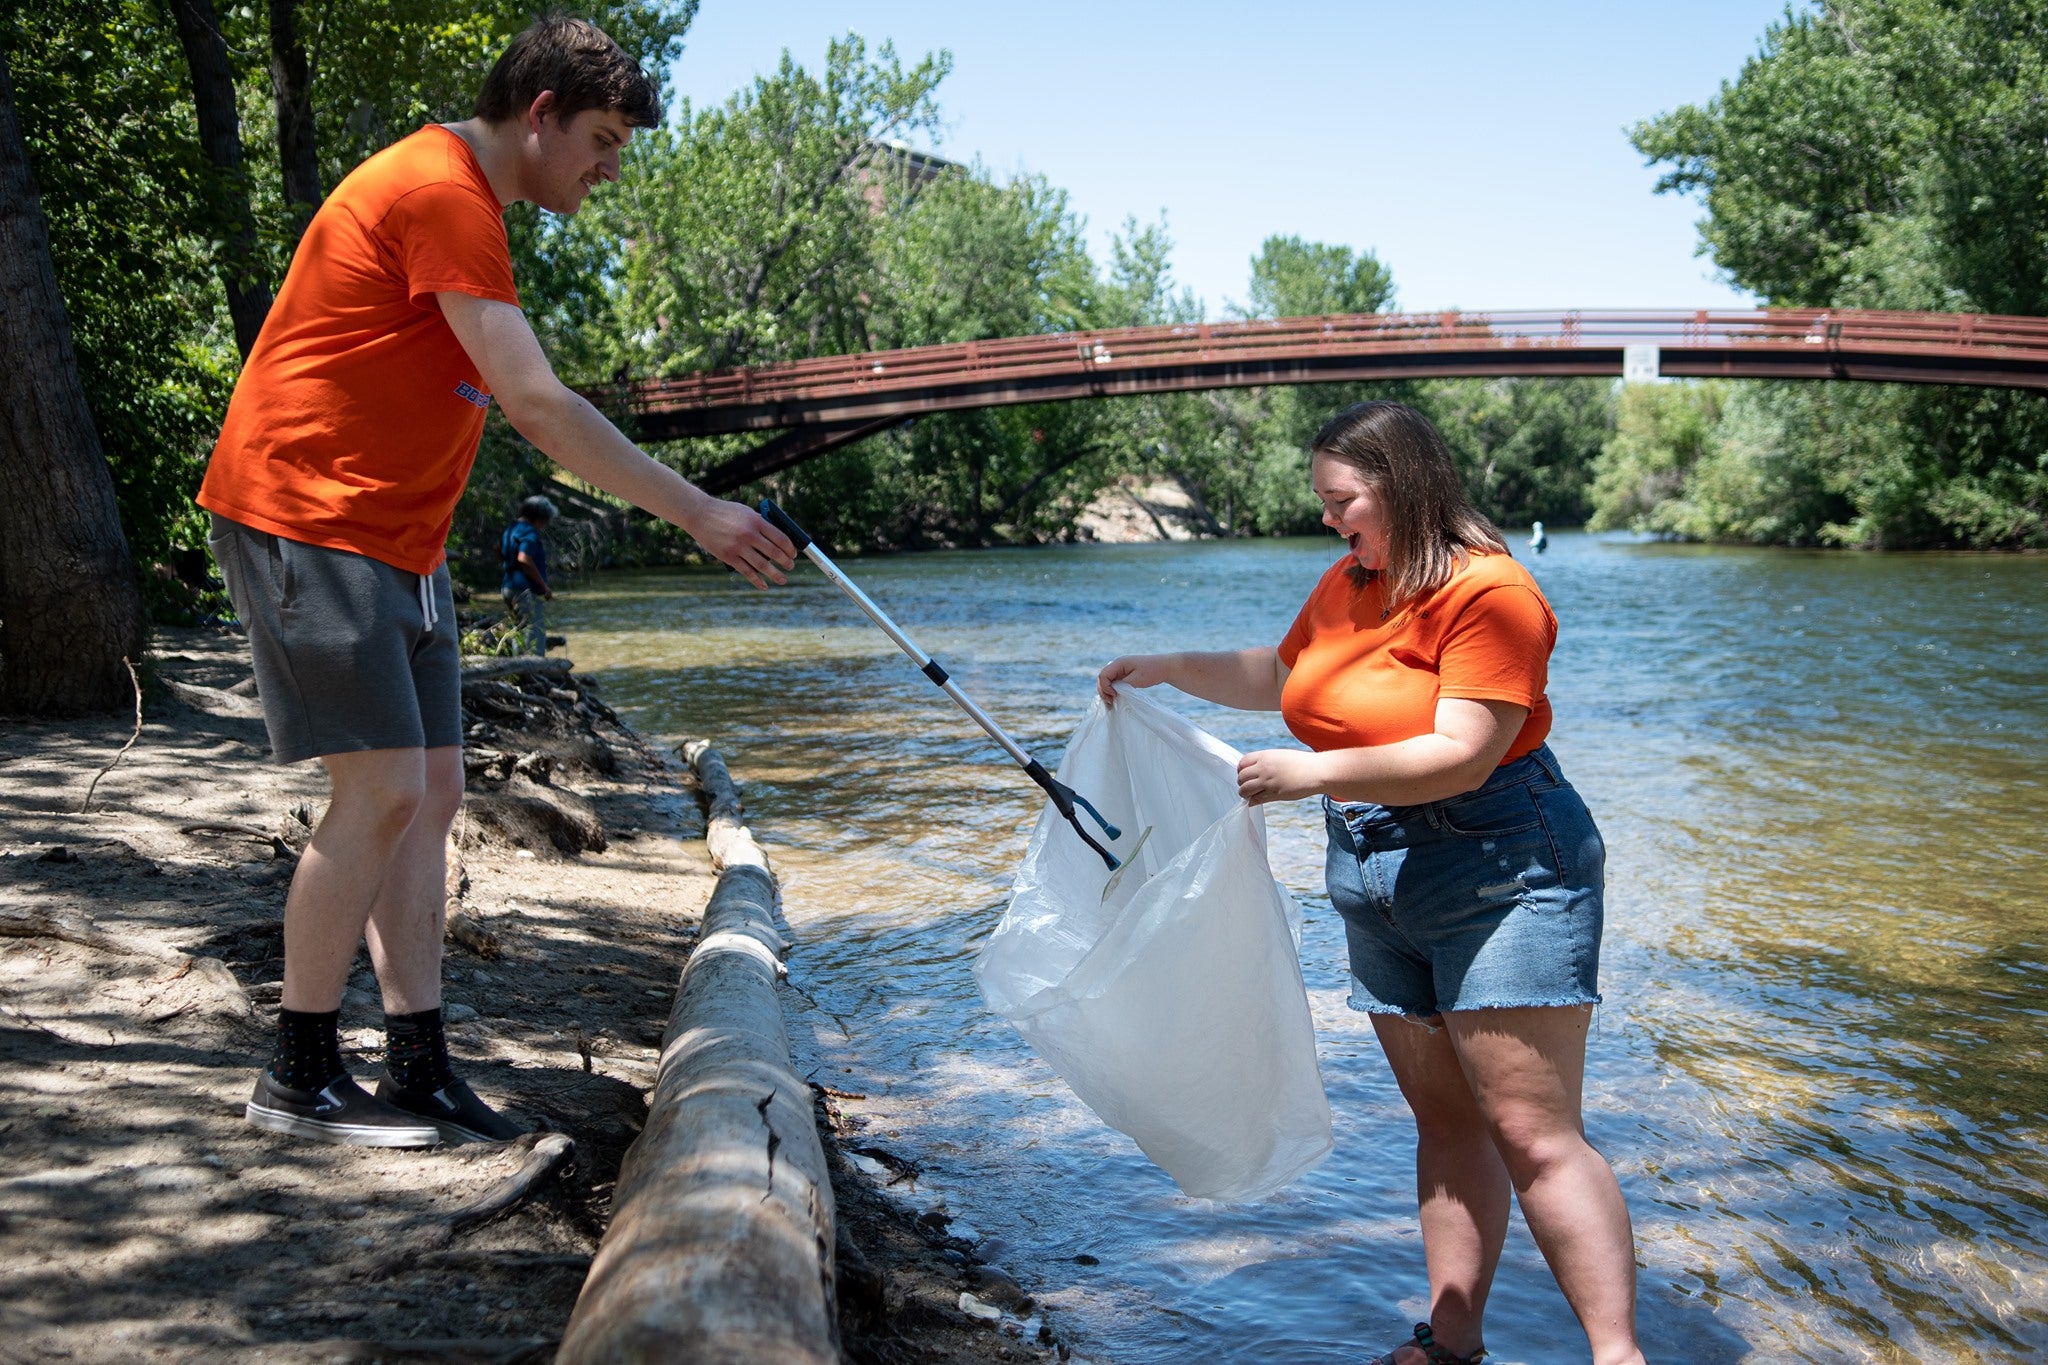 Two students pick up litter around the Boise river